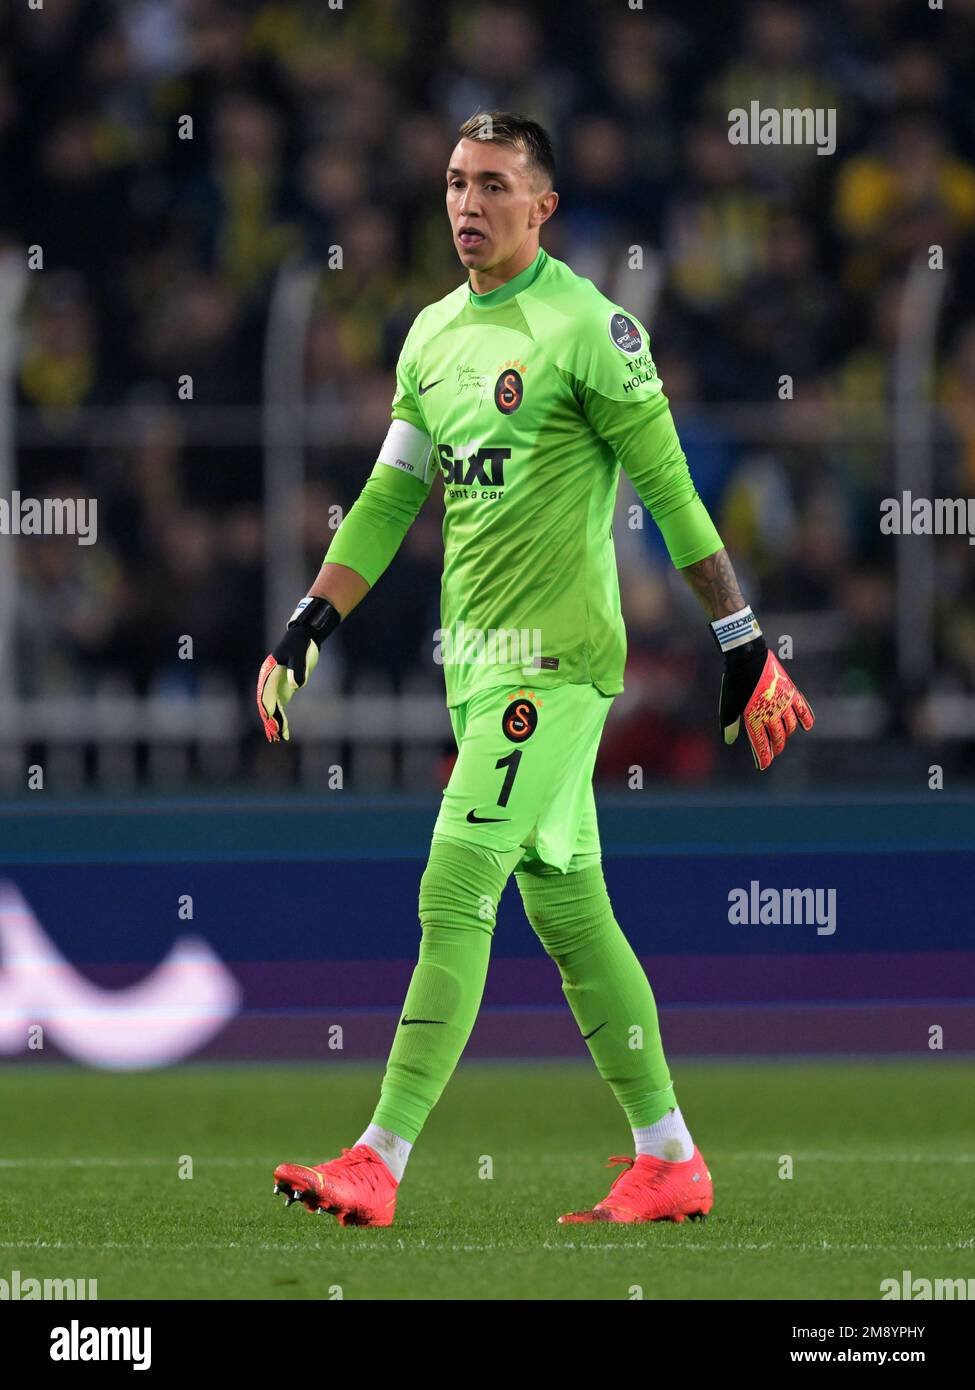 ISTANBUL - Galatasaray AS goalkeeper Fernando Muslera during the Turkish  Super Lig match between Fenerbahce AS and Galatasaray AS at Ulker stadium  on January 8, 2023 in Istanbul, Turkey. AP | Dutch